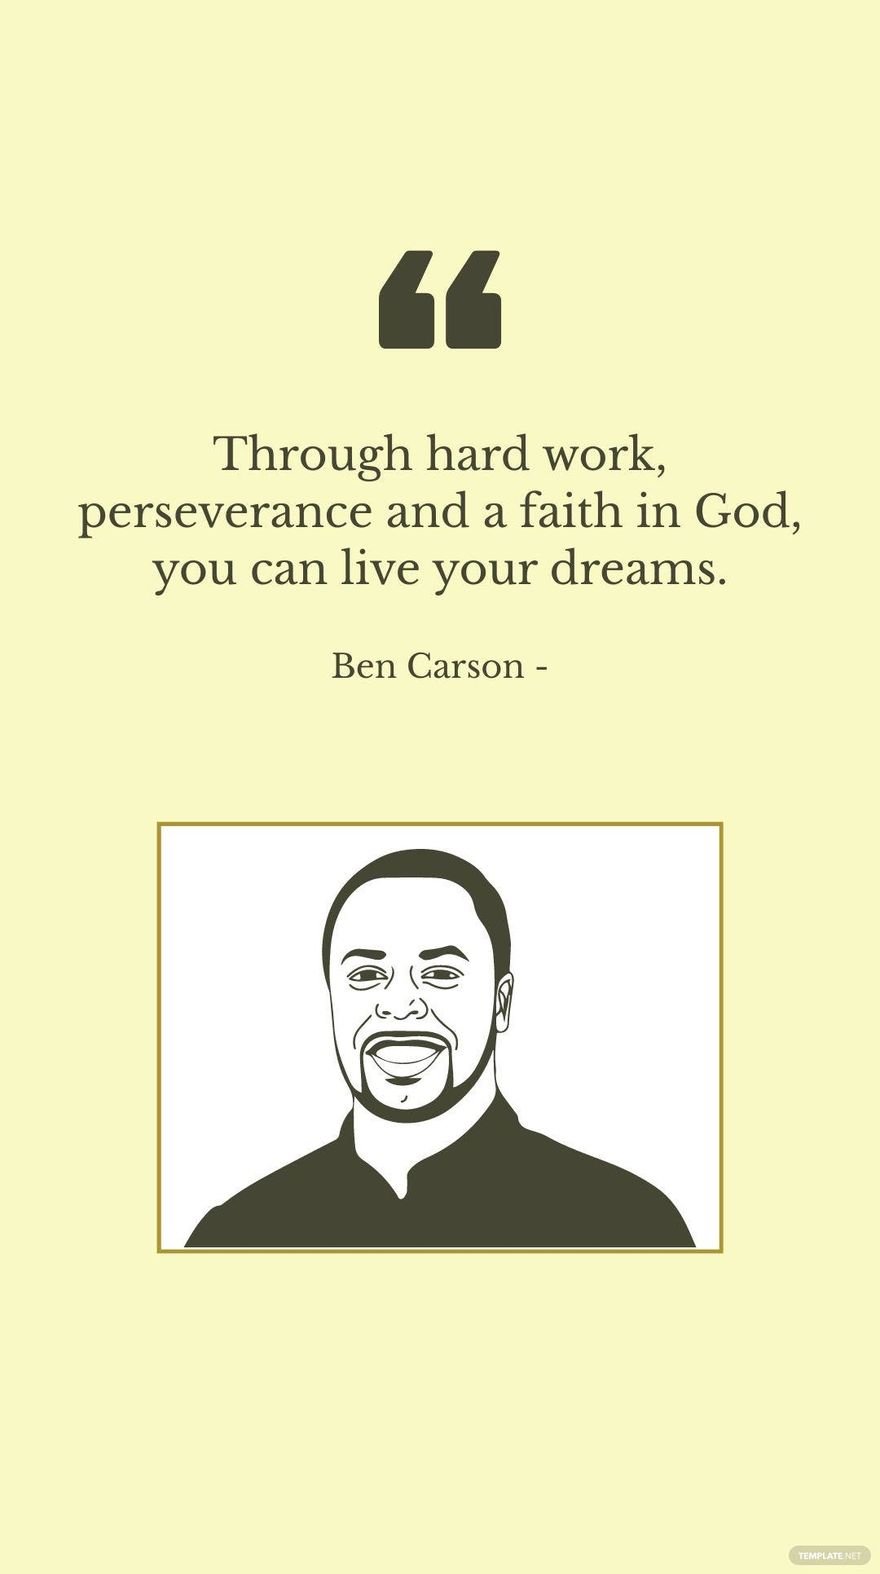 Free Ben Carson - Through hard work, perseverance and a faith in God, you can live your dreams. in JPG